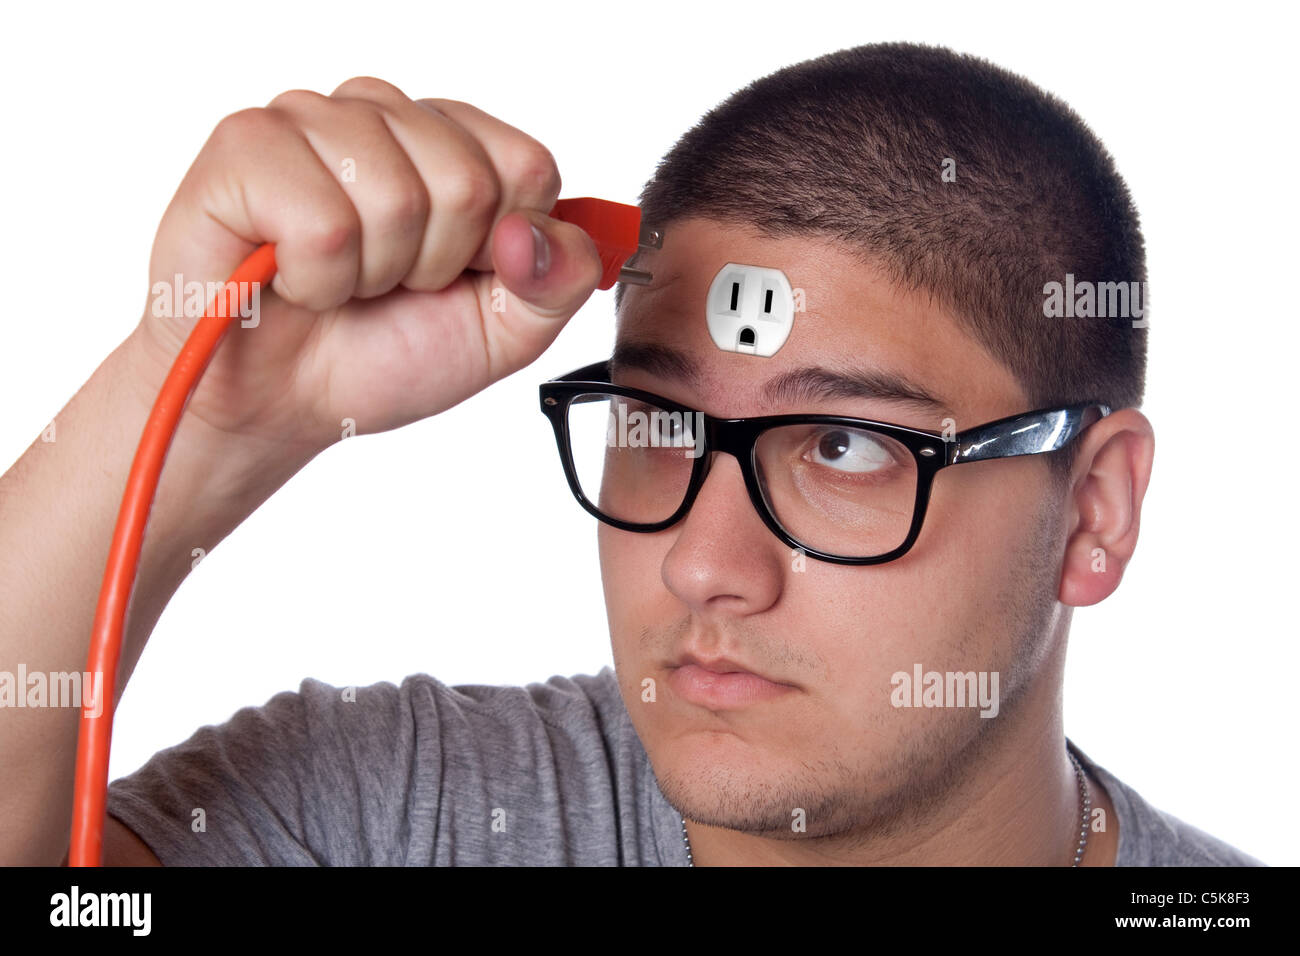 Conceptual image of a young man holding an electrical chord unplugged from the outlet on his forehead. Stock Photo